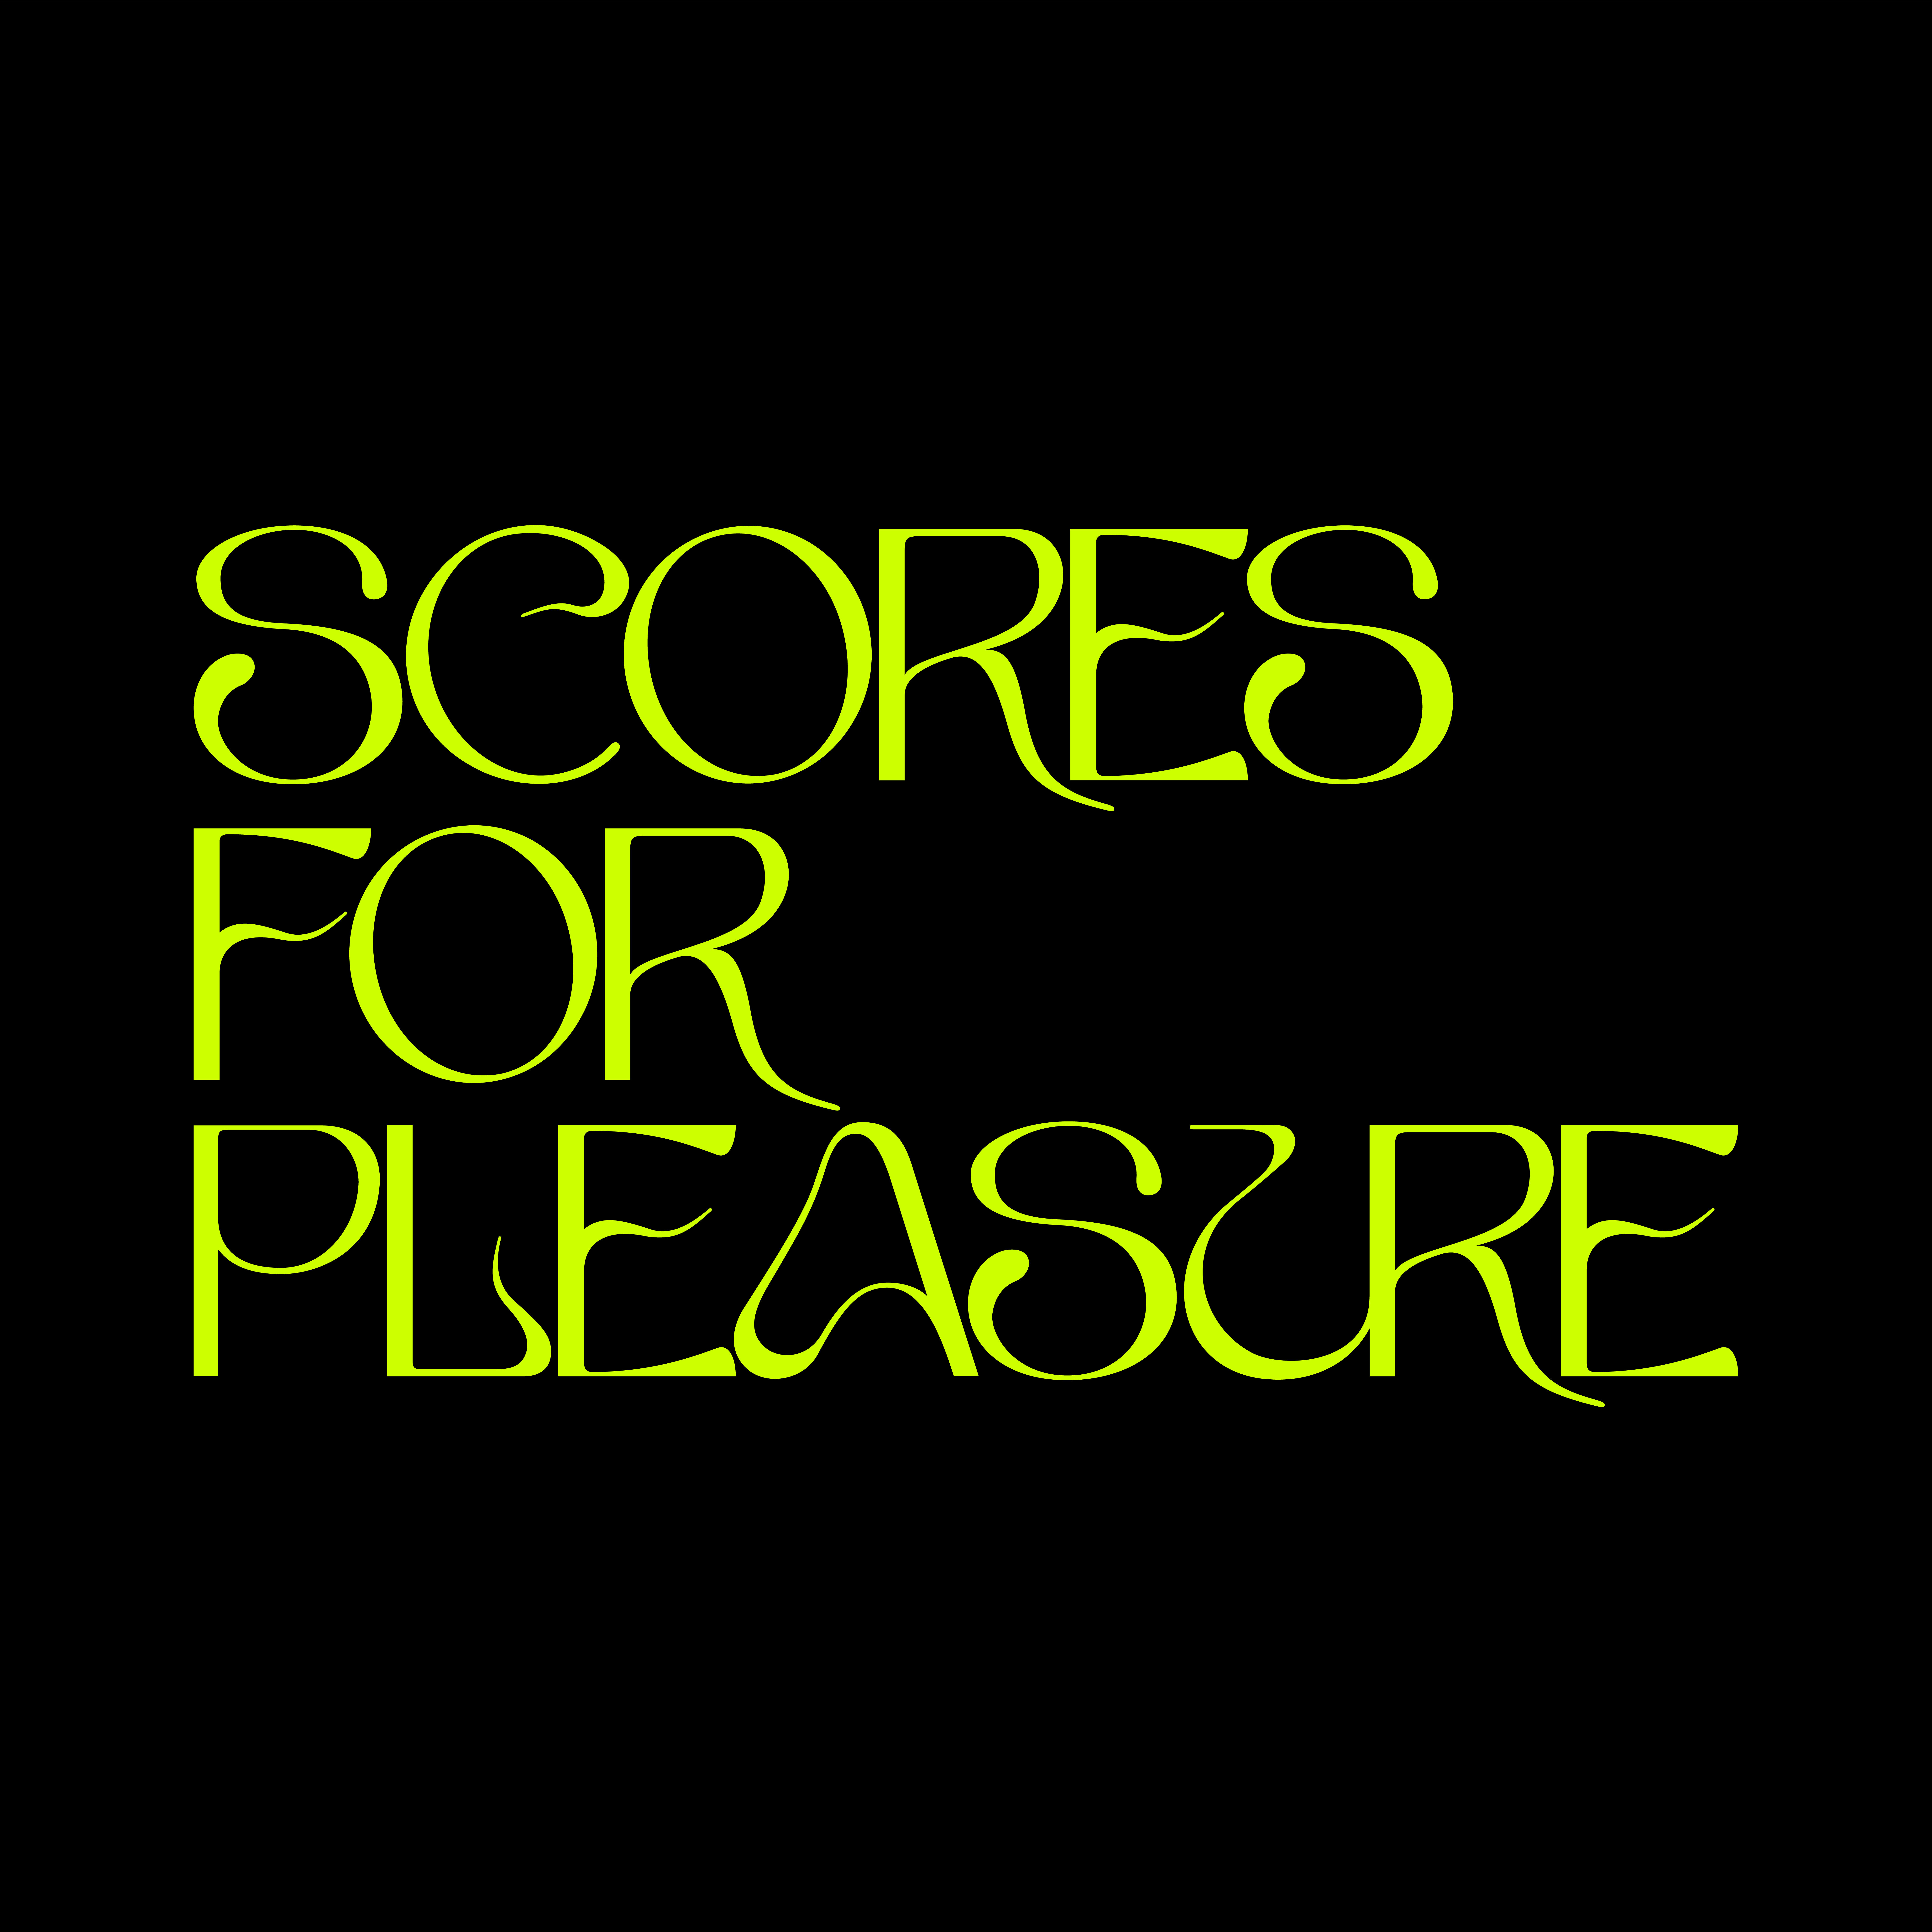 Read more about the article Scores for Pleasure